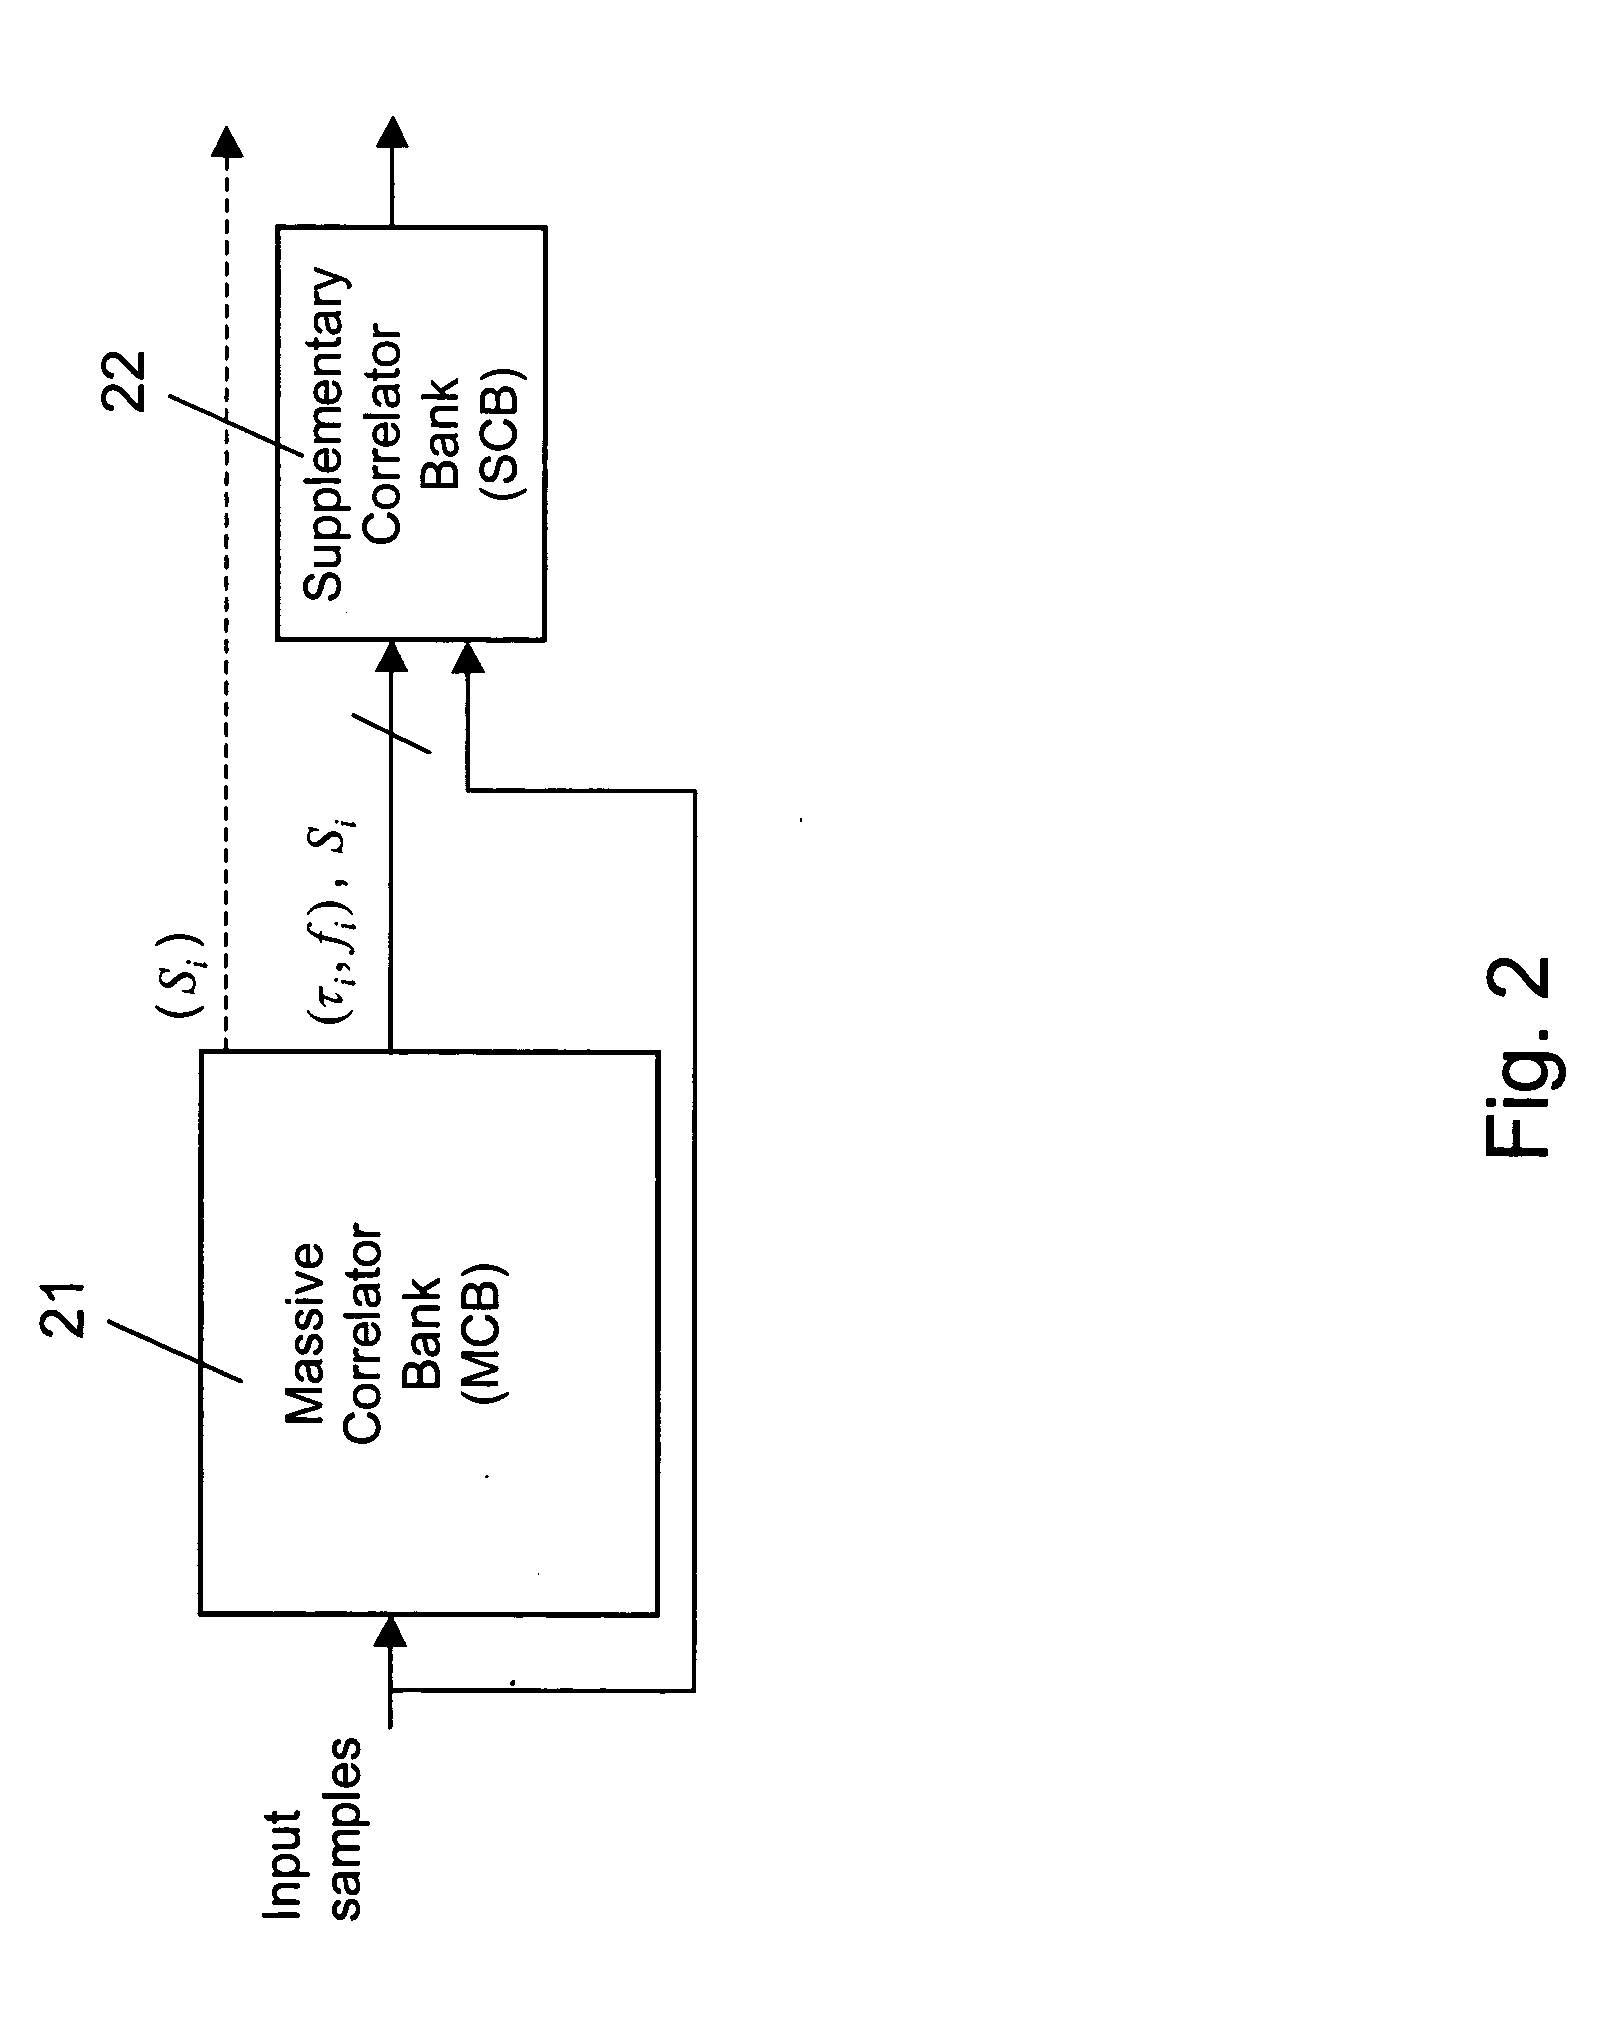 Acquisition of a code modulated signal